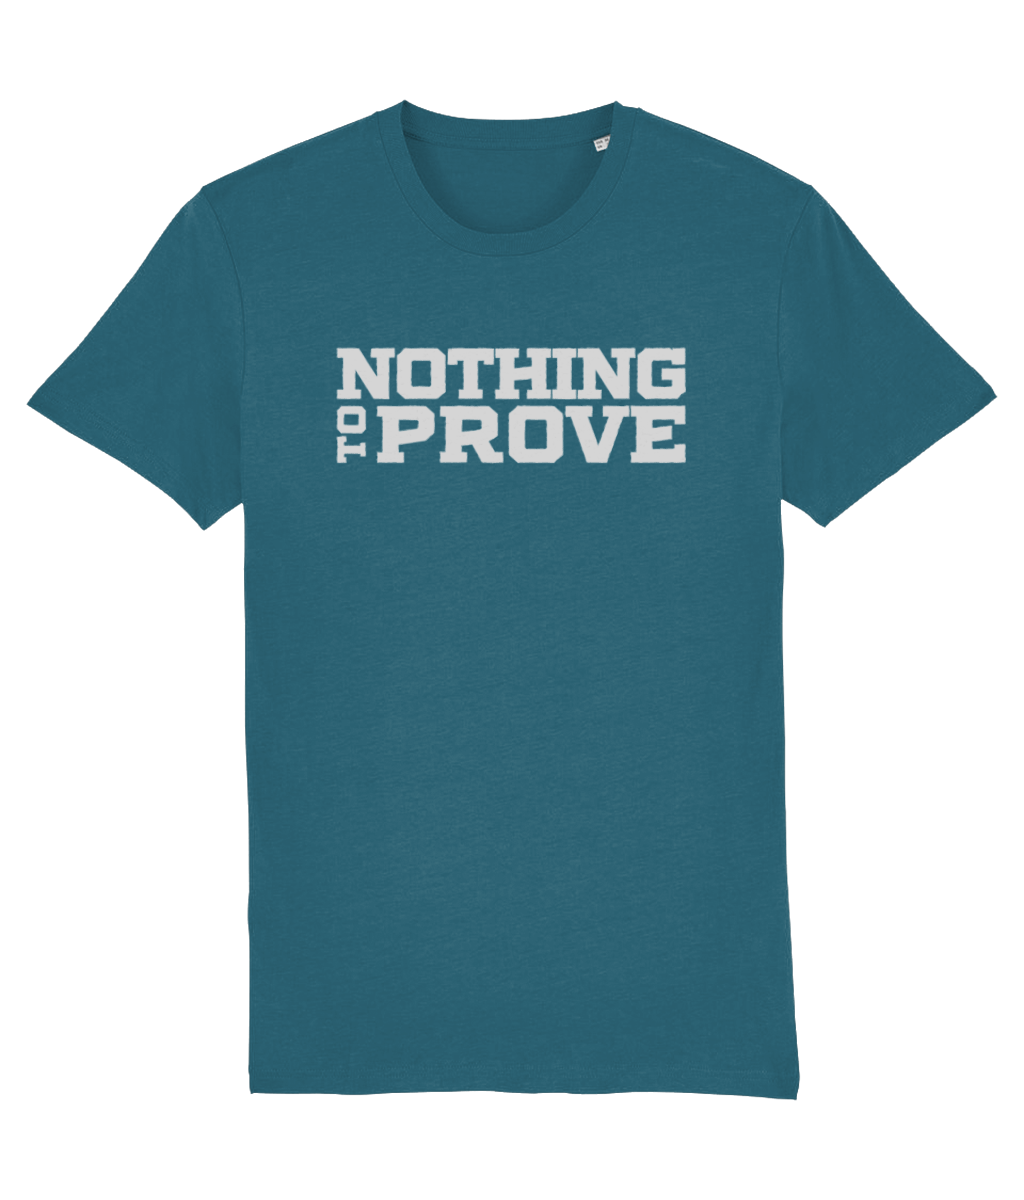 Blue variant of the Nothing to Prove T-Shirt